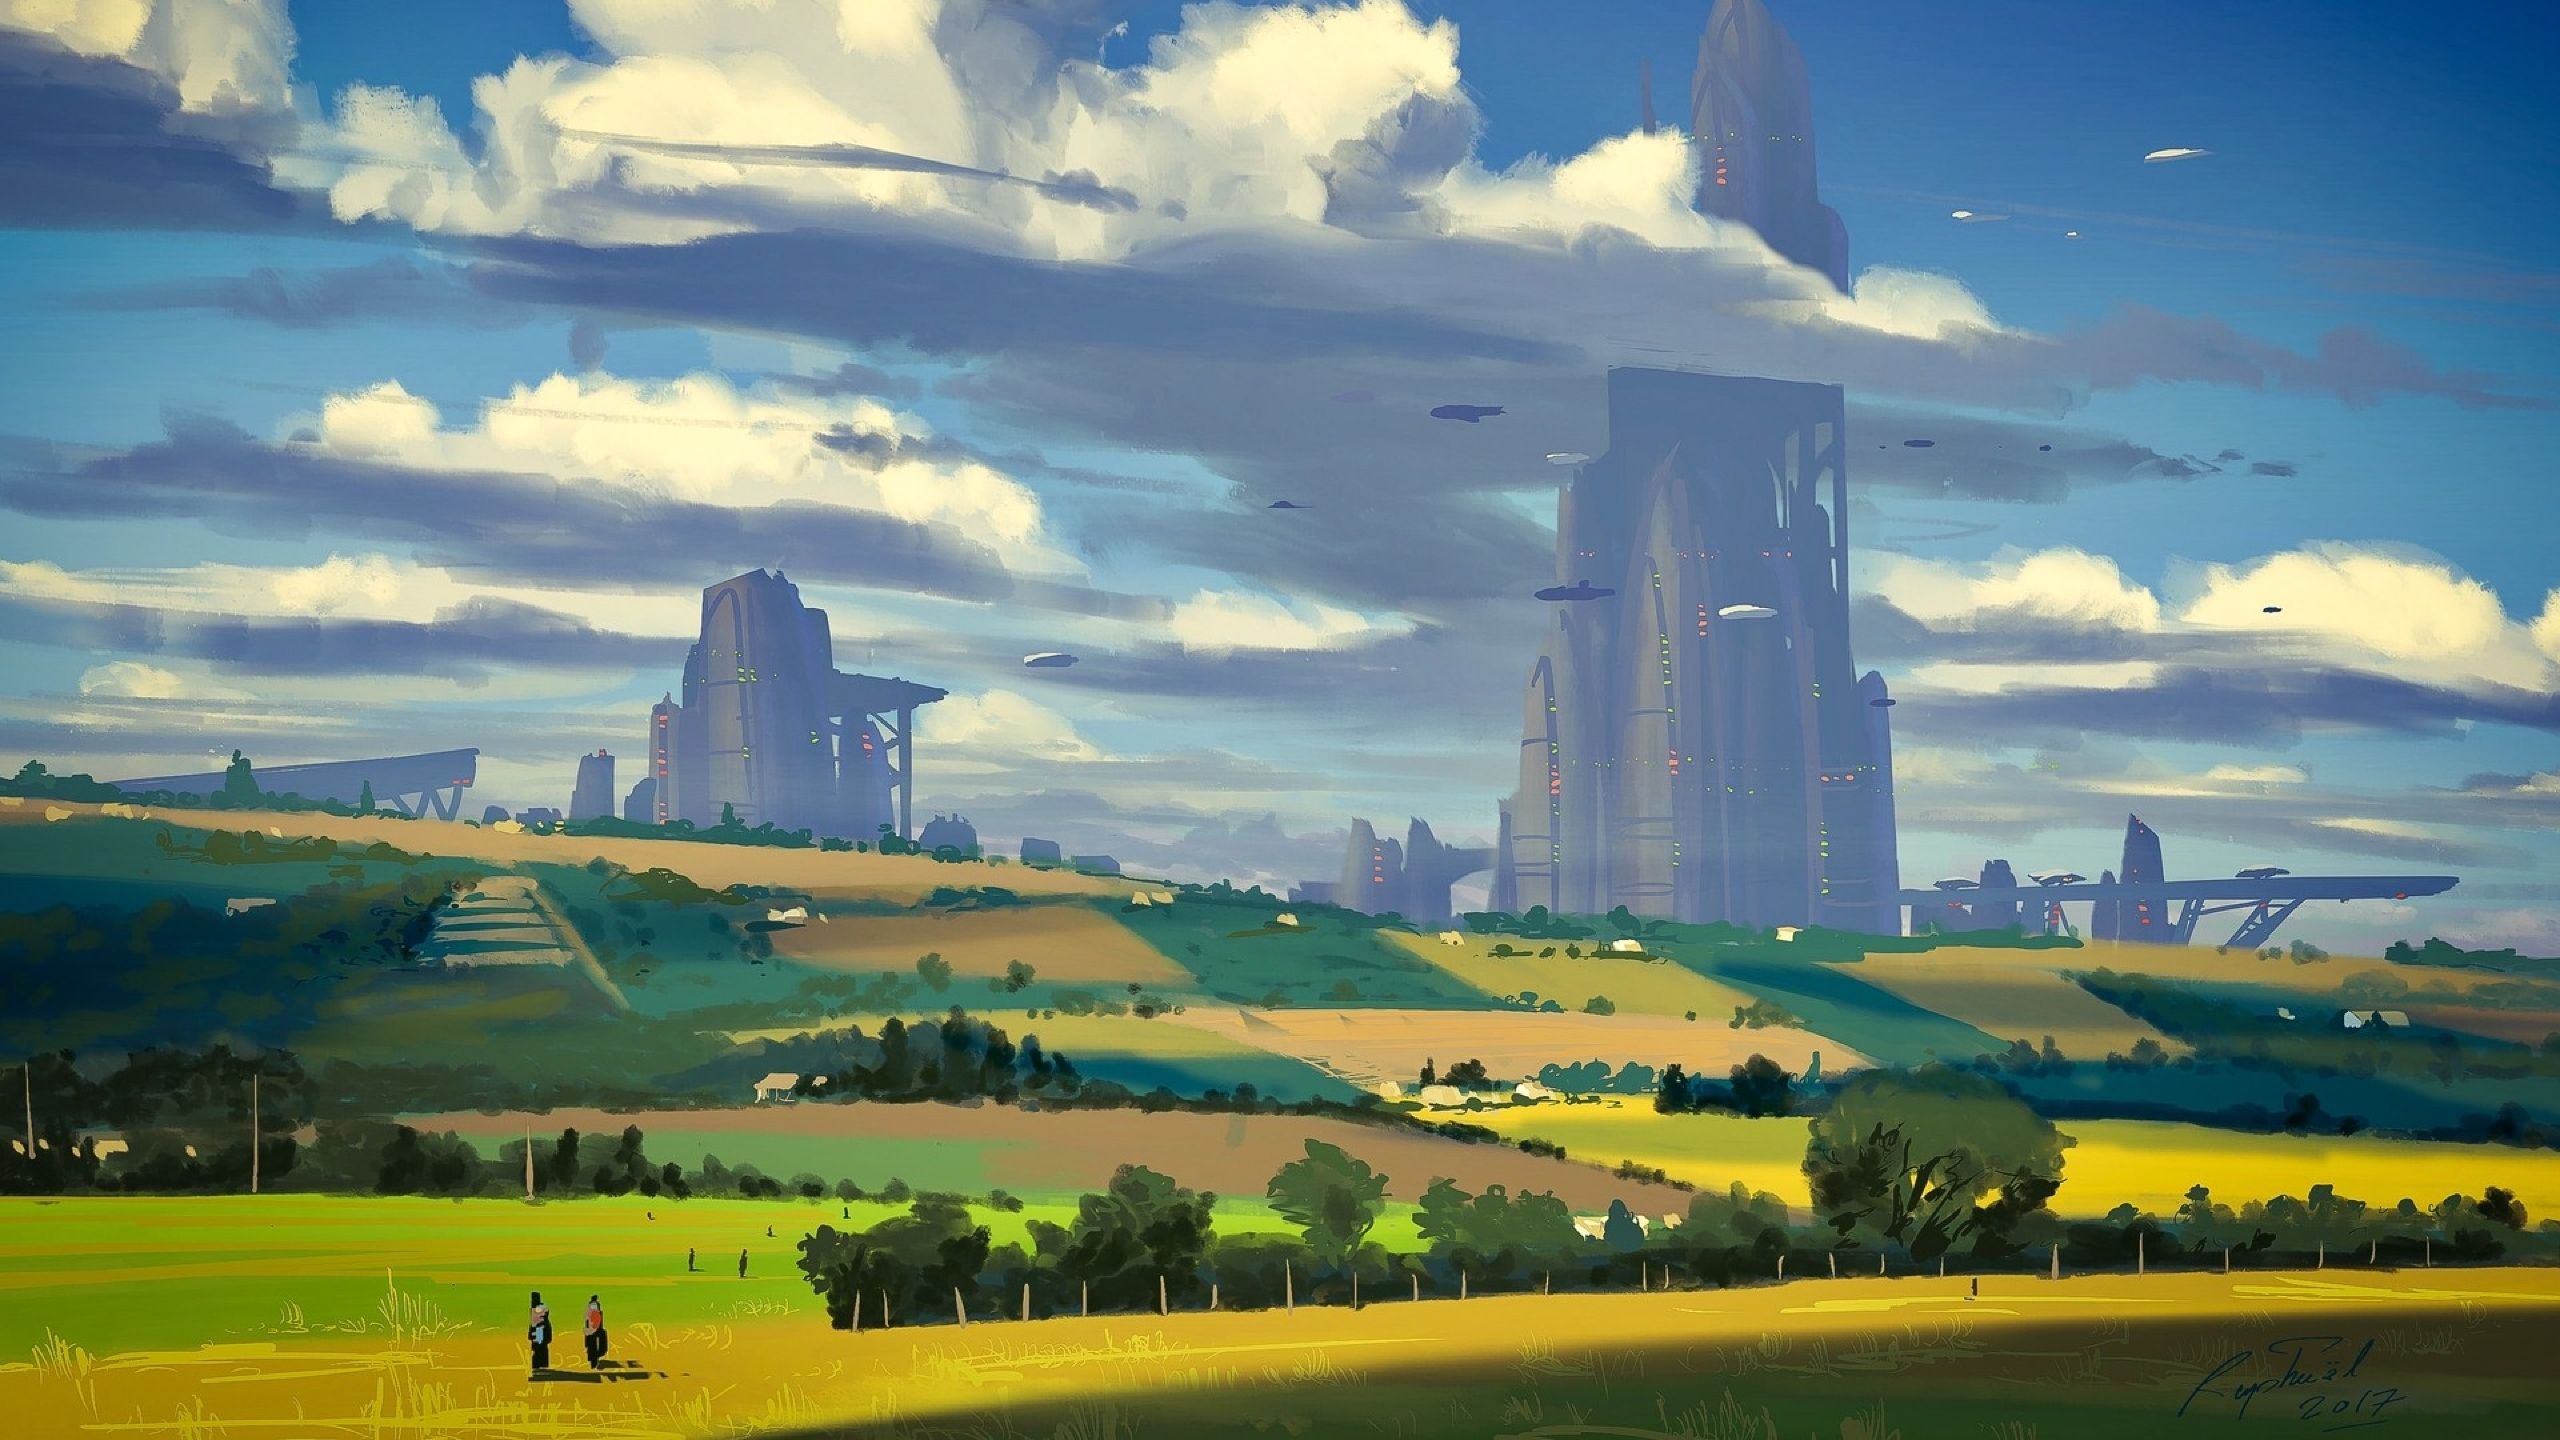 Sci Fi Countryside Painting City 1440P Resolution Wallpaper, HD Artist 4K Wallpaper, Image, Photo and Background